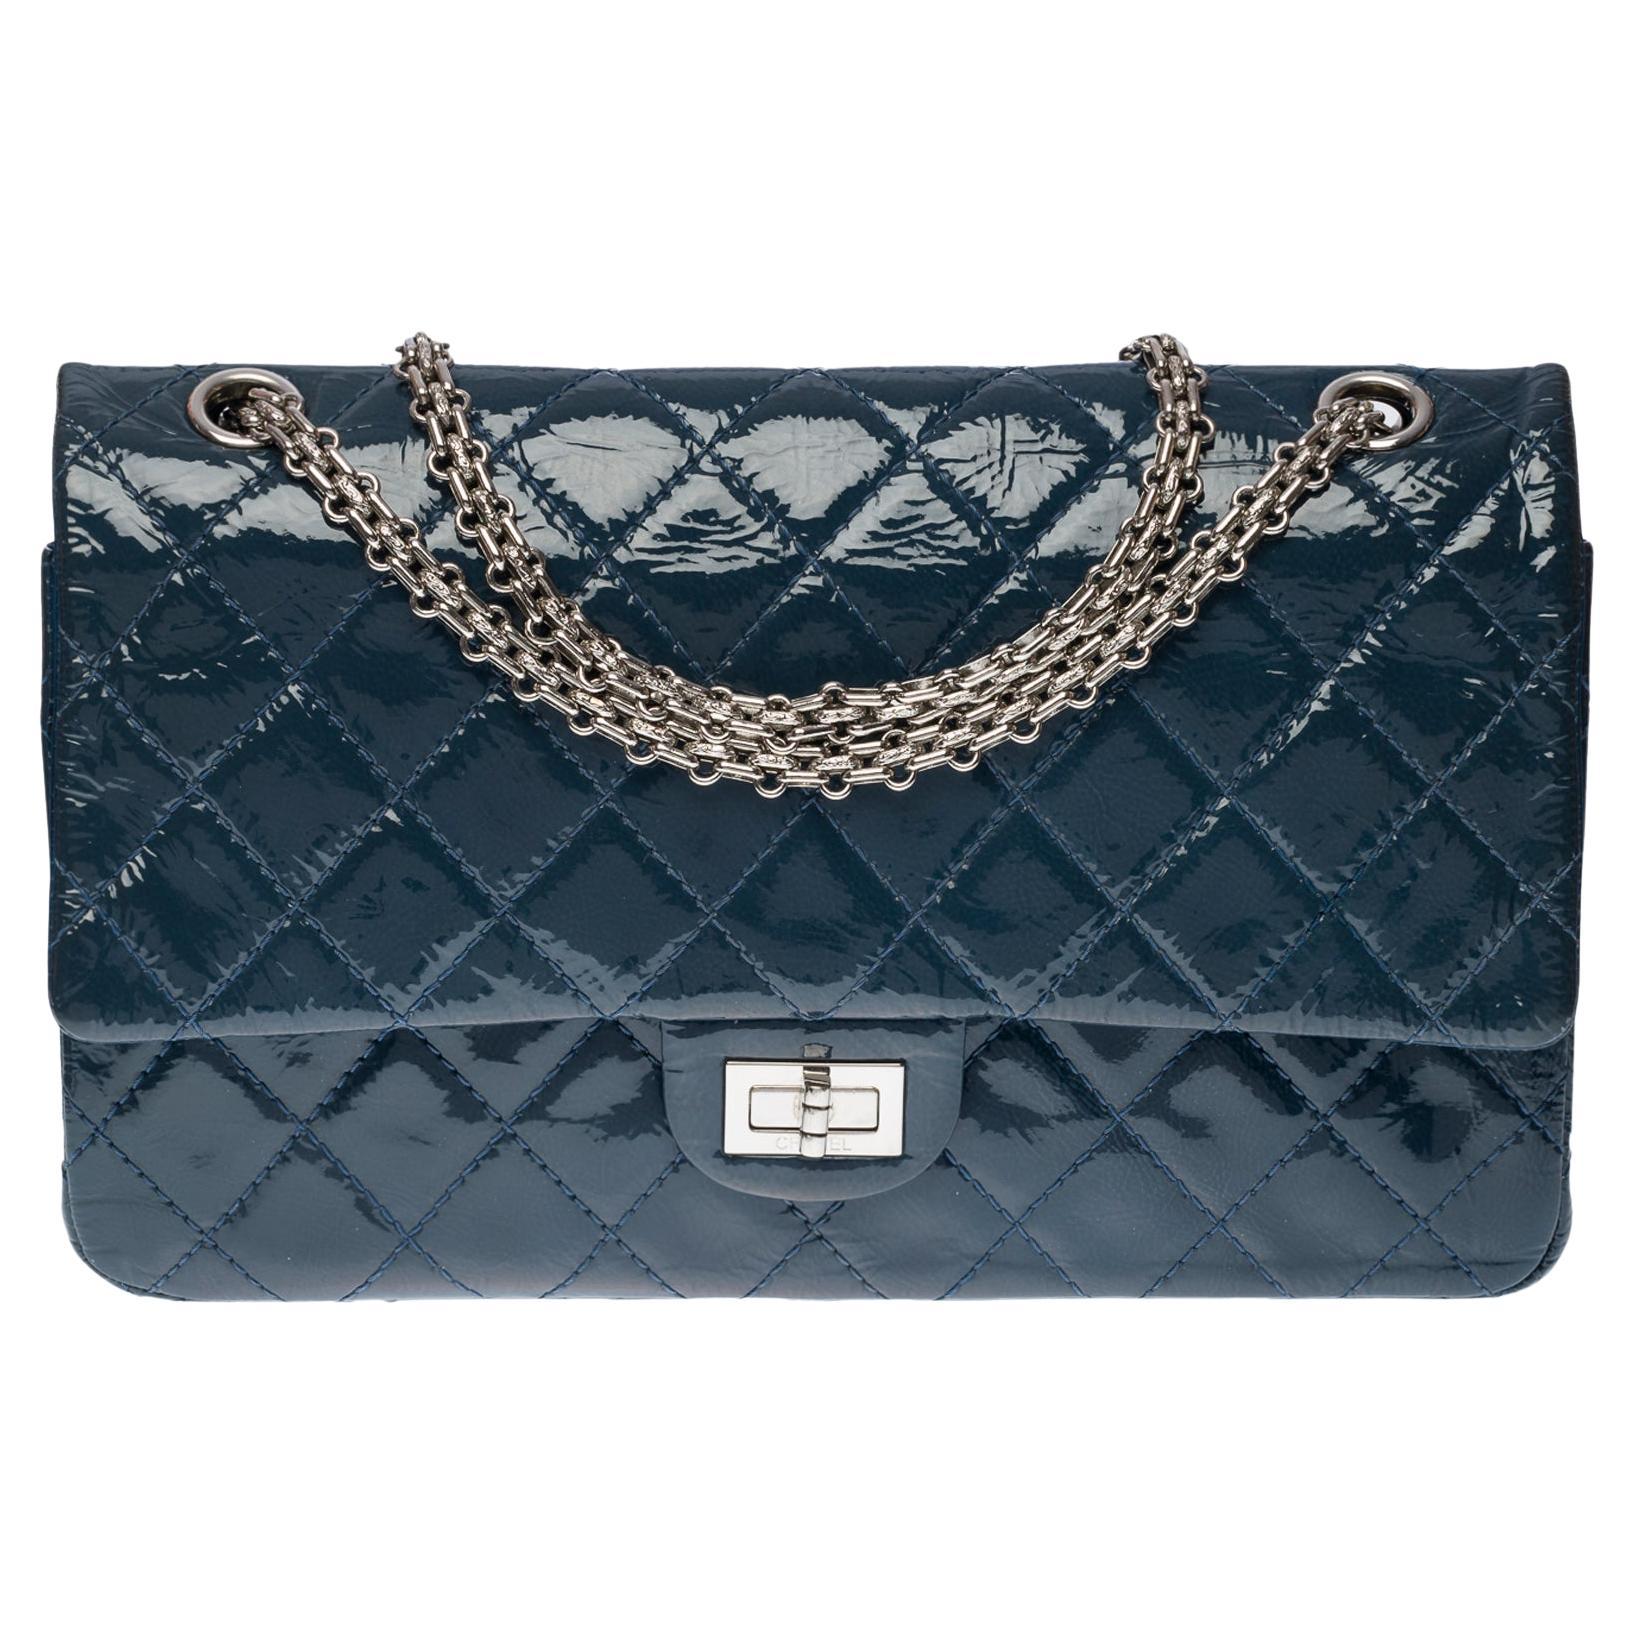 Chanel Classic 2.55 double flap shoulder bag in blue quilted